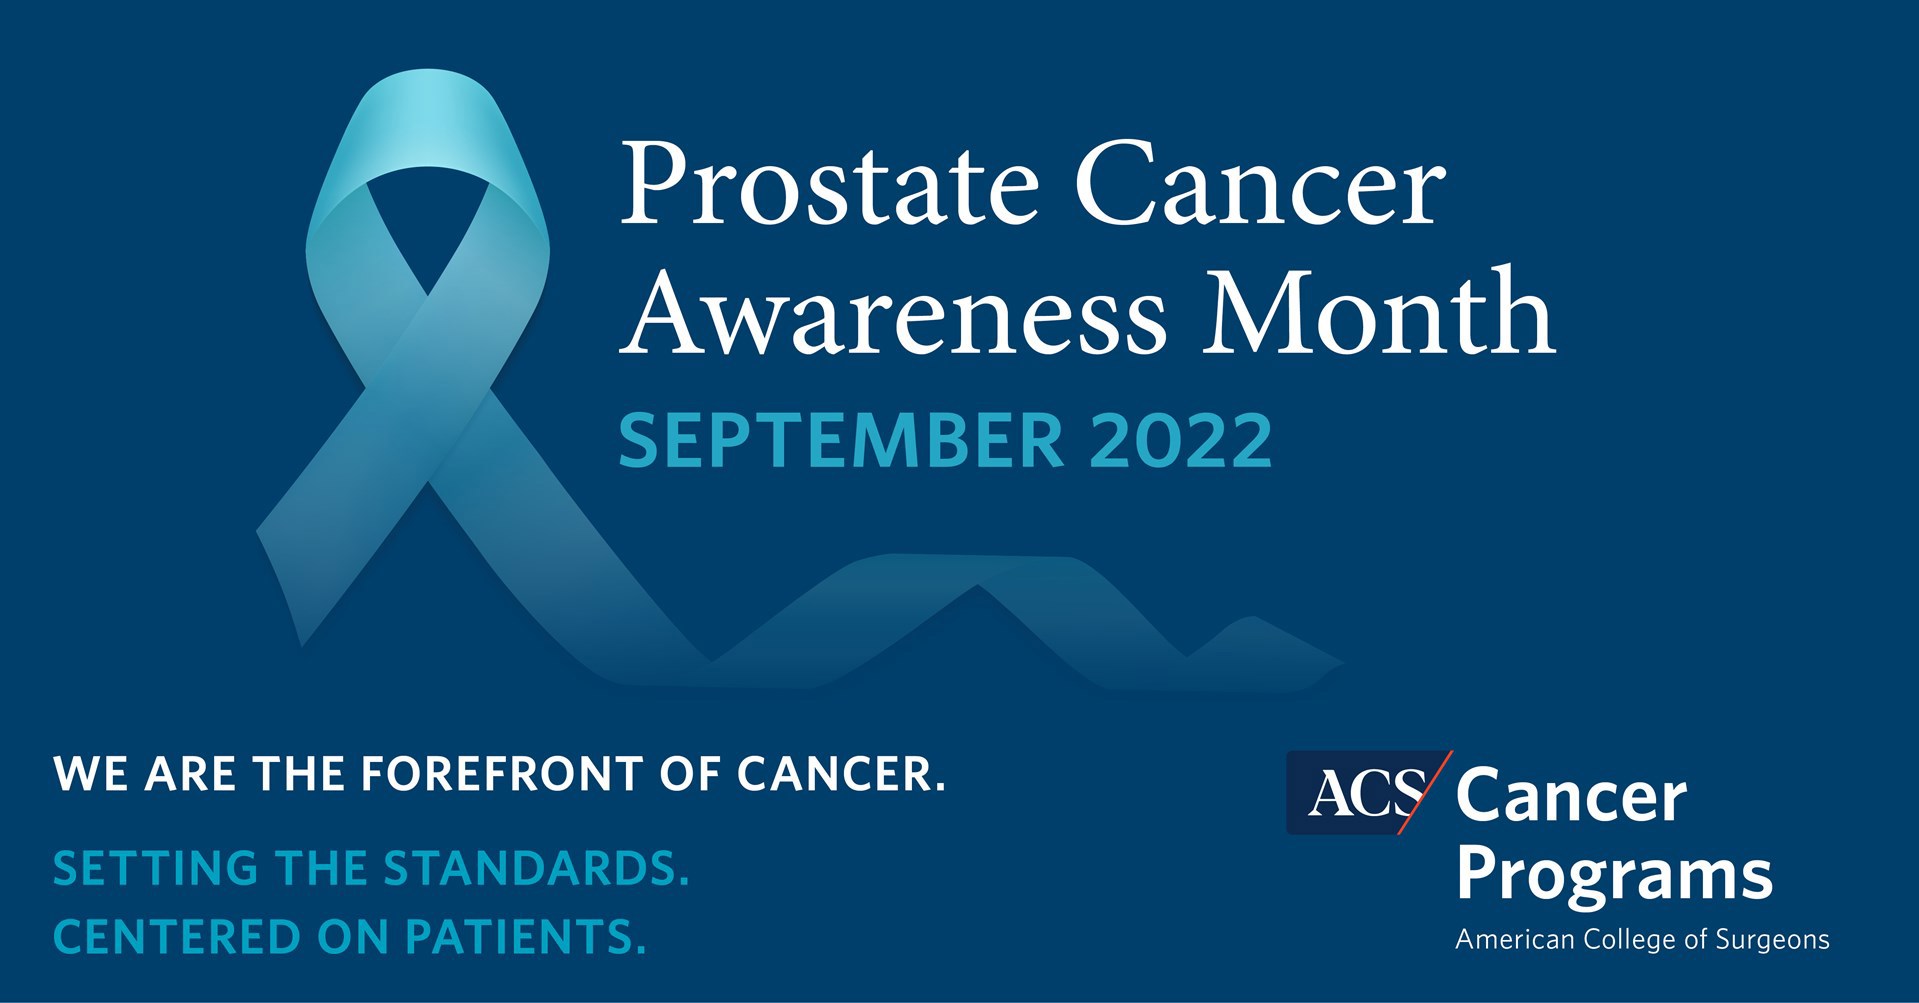 PROSTATE CANCER AWARENESS MONTH